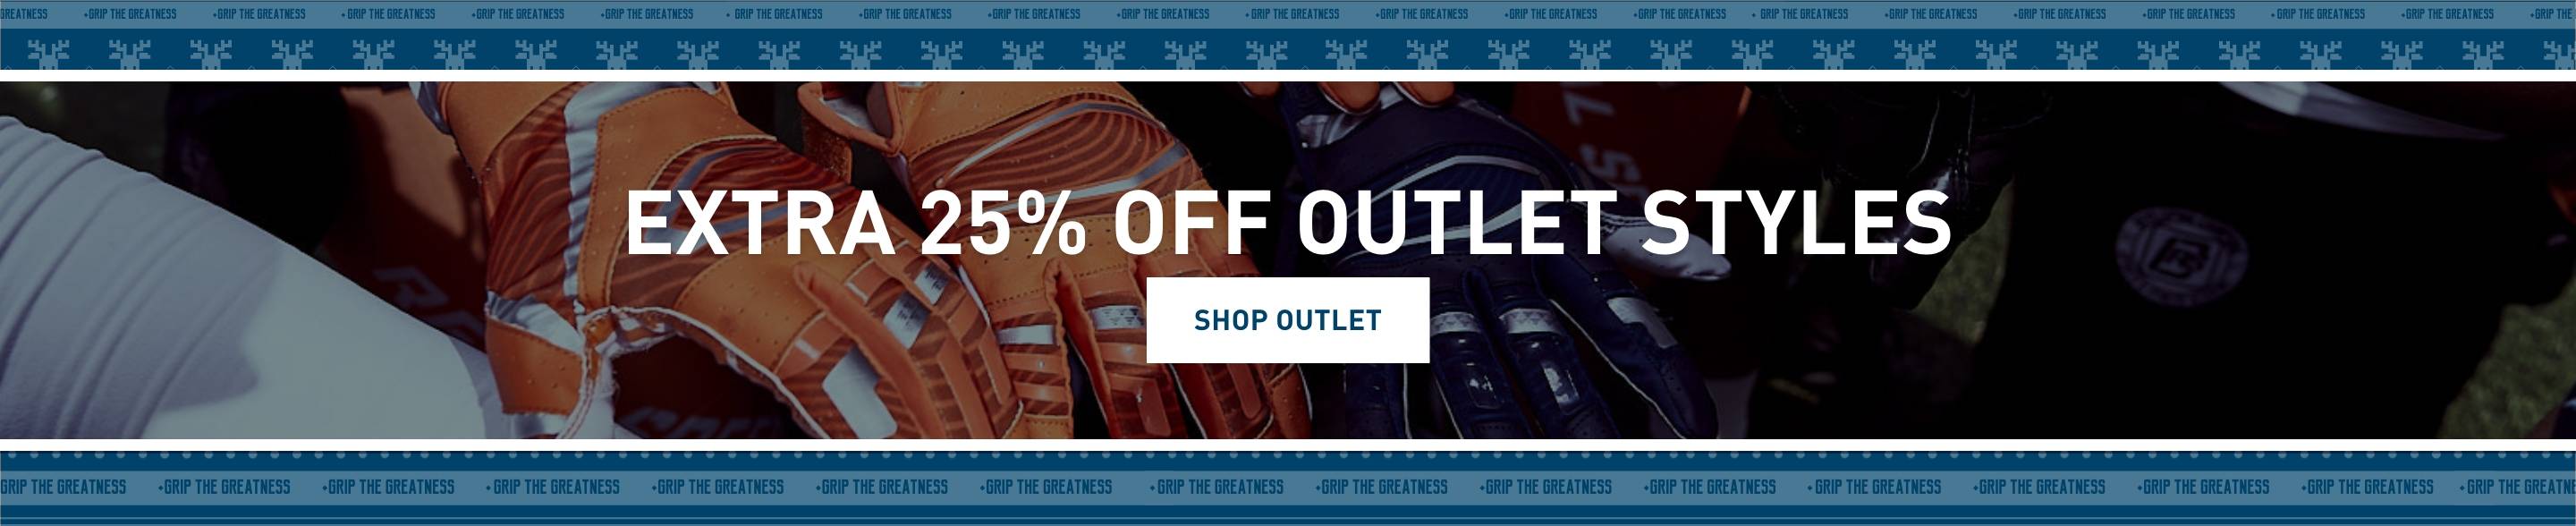 Extra 25% Off Outlet Styles Shop Outlet